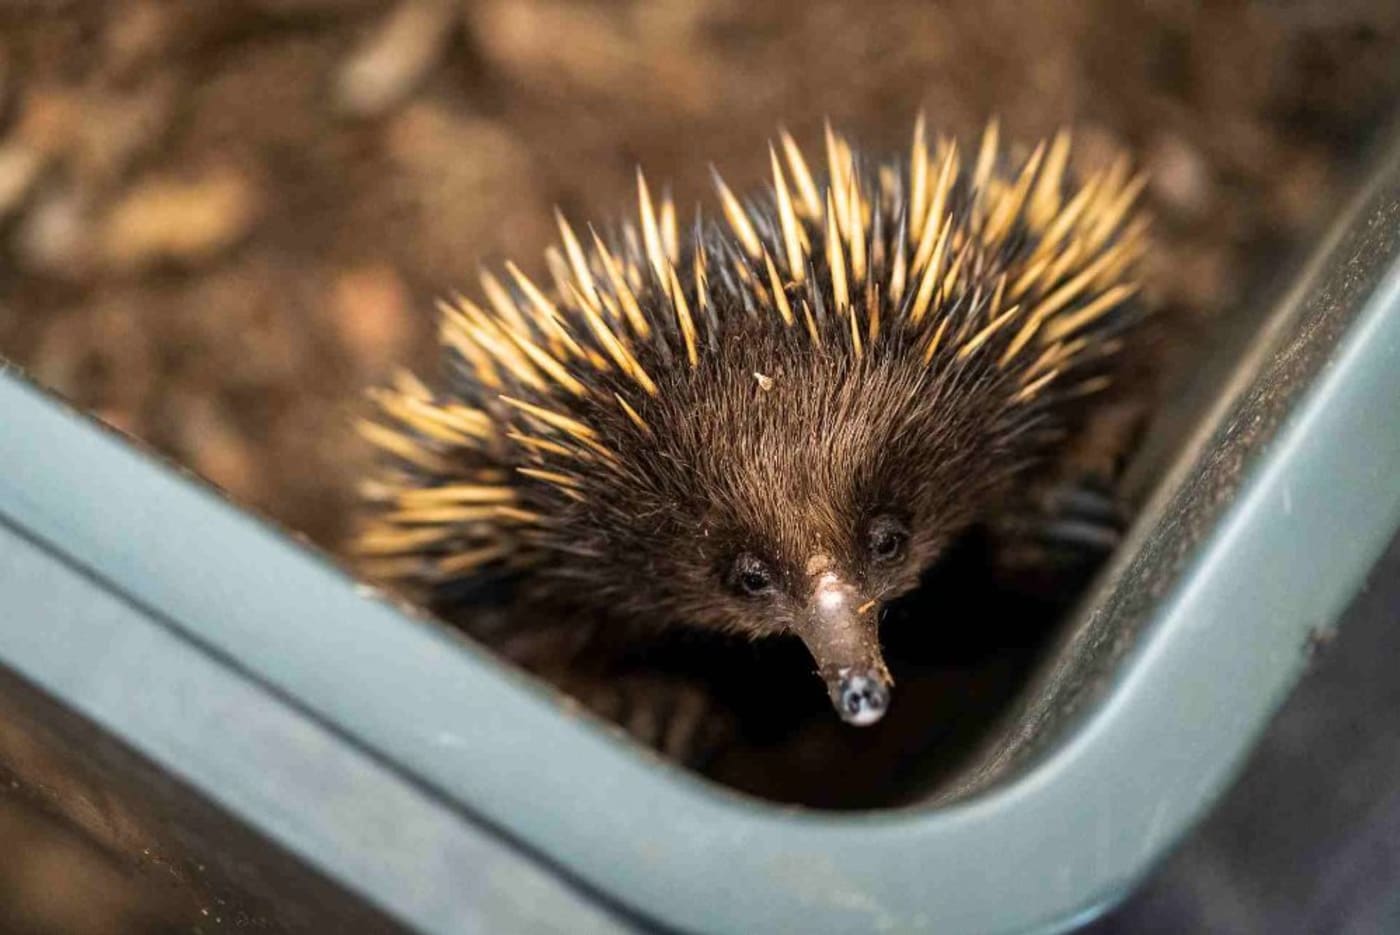 Ellie= an injured echidna in care with Wildcare in Carwoola= NSW